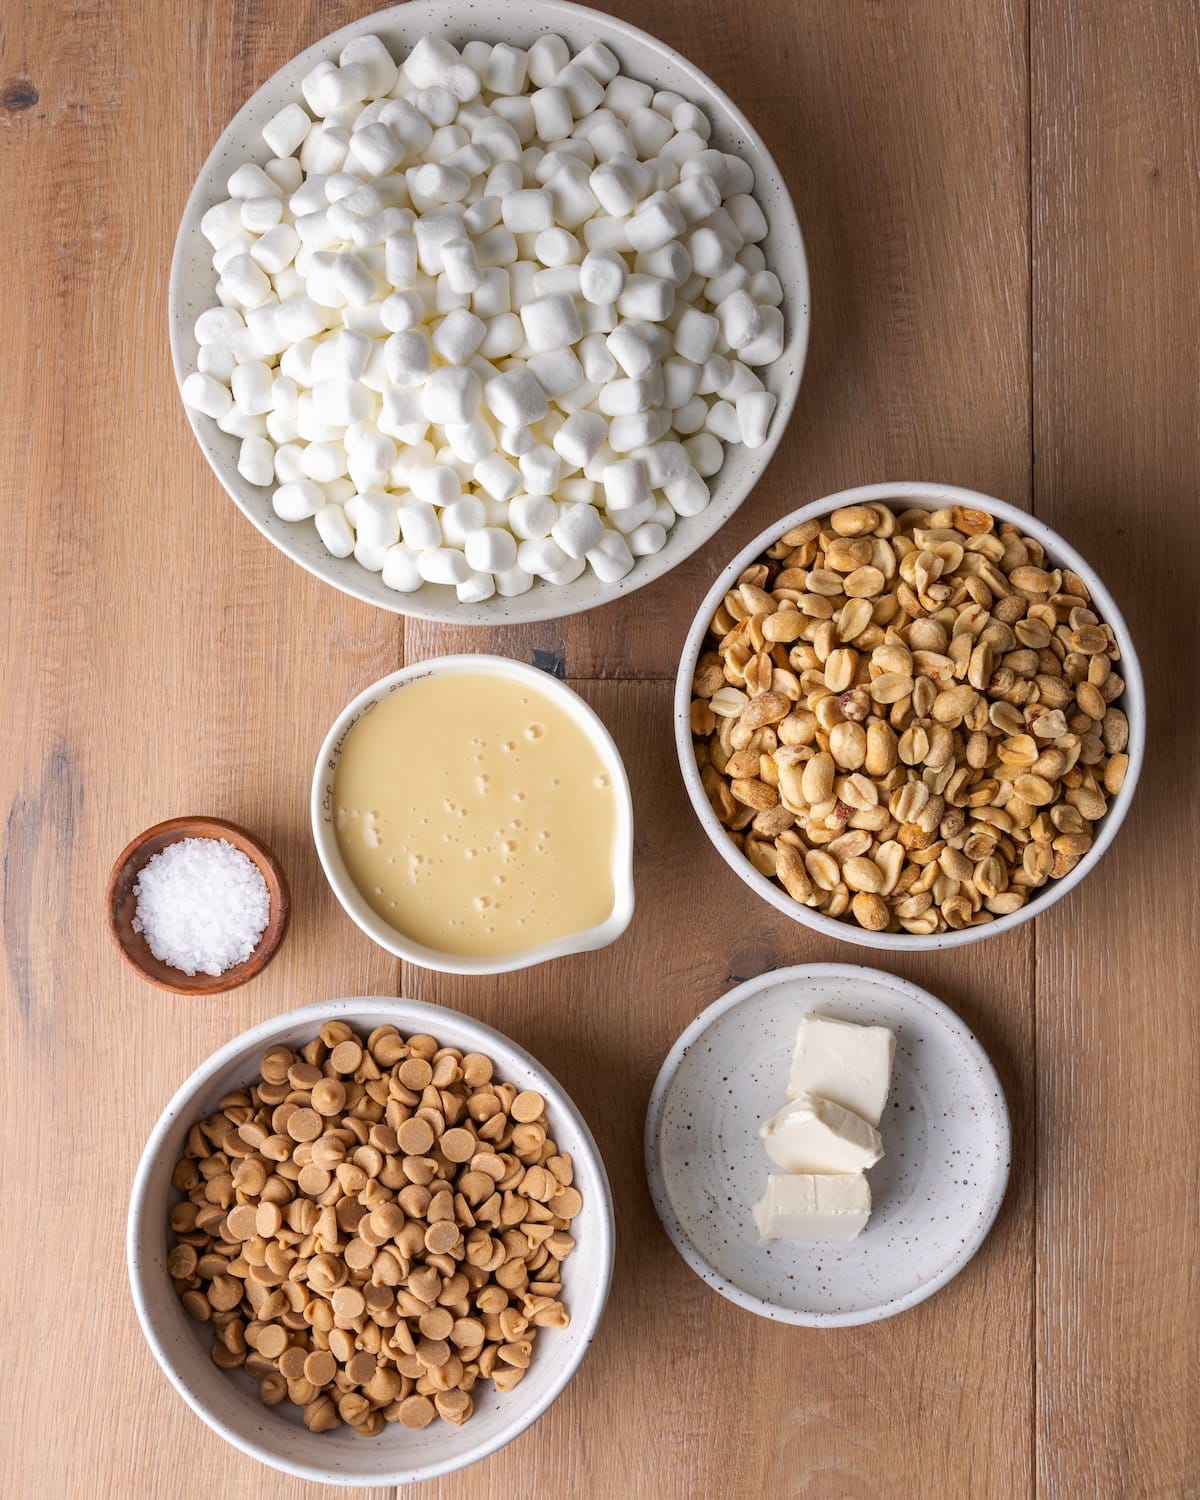 The ingredients for homemade PayDay bars.